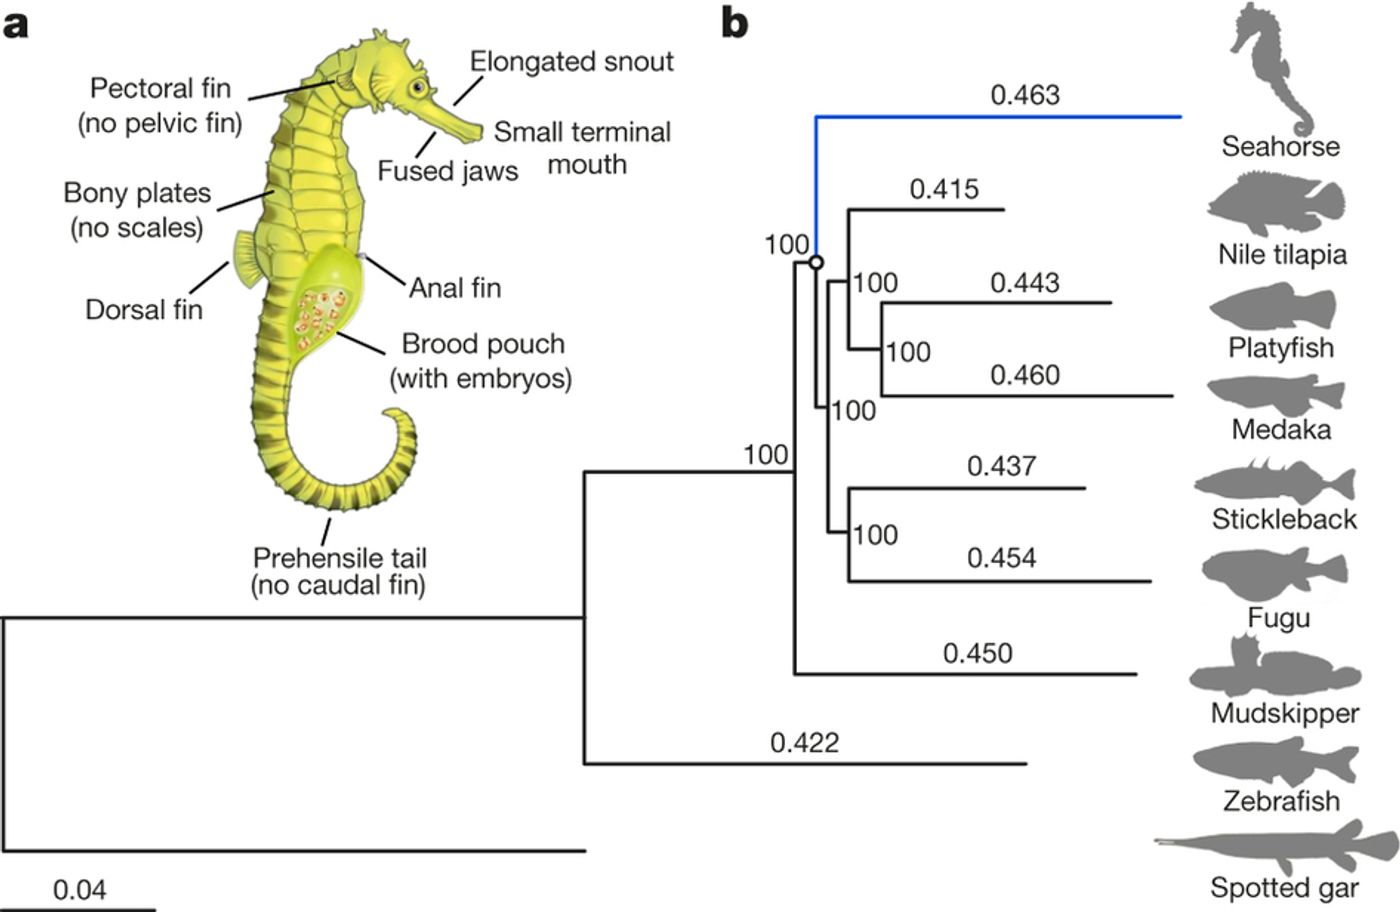 a, Schematic diagram of a pregnant male seahorse. b, The phylogenetic tree generated using protein sequences. The values on the branches are the distances (number of substitutions per site) between each of the teleost fishes and the spotted gar. Spotted gar, Lepisosteus oculatus; zebrafish, Danio rerio. (doi:10.1038/nature20595)